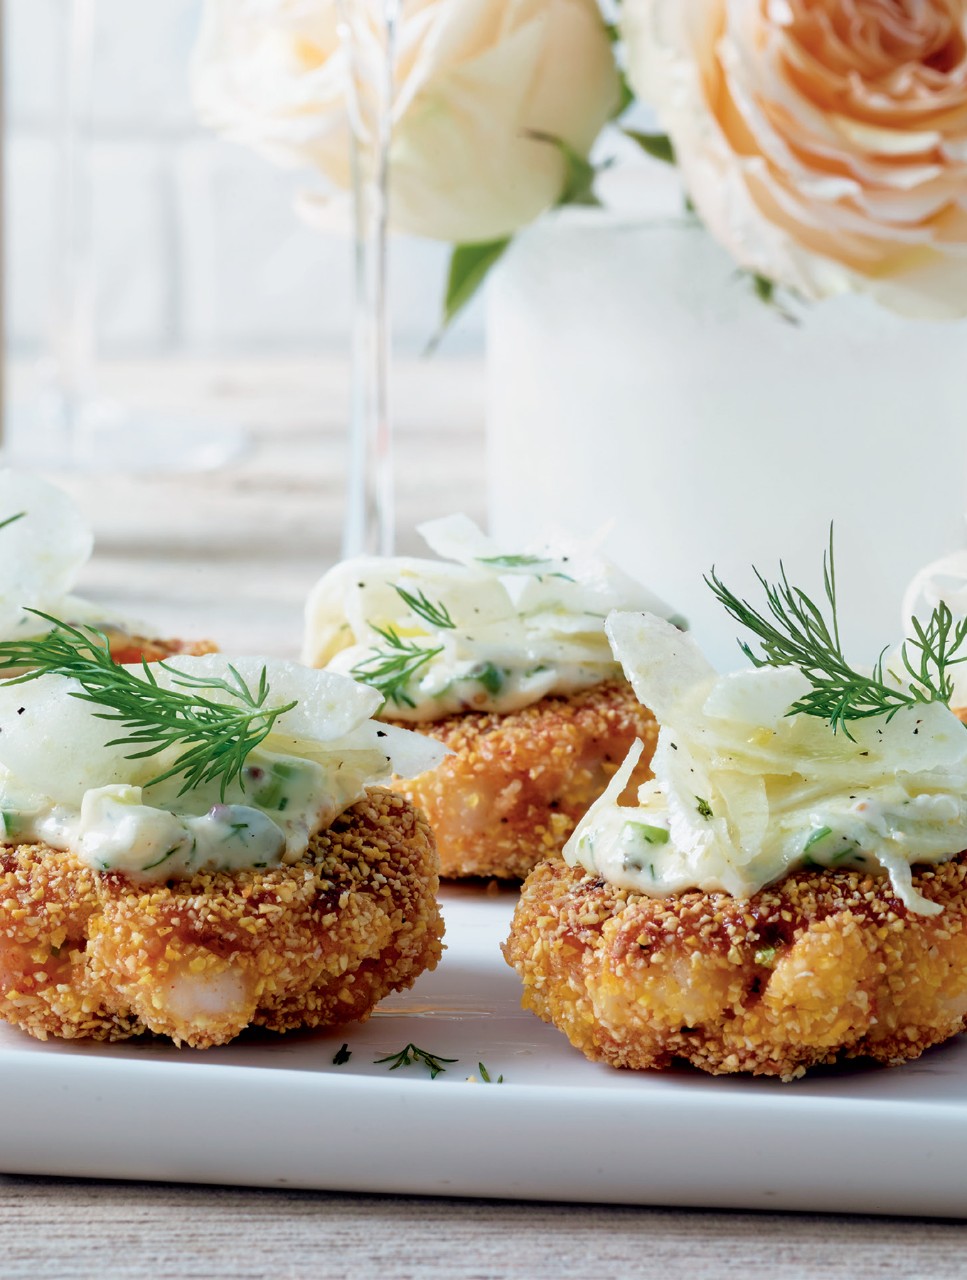 Shrimp Cakes with Dill Remoulade & Fennel Slaw